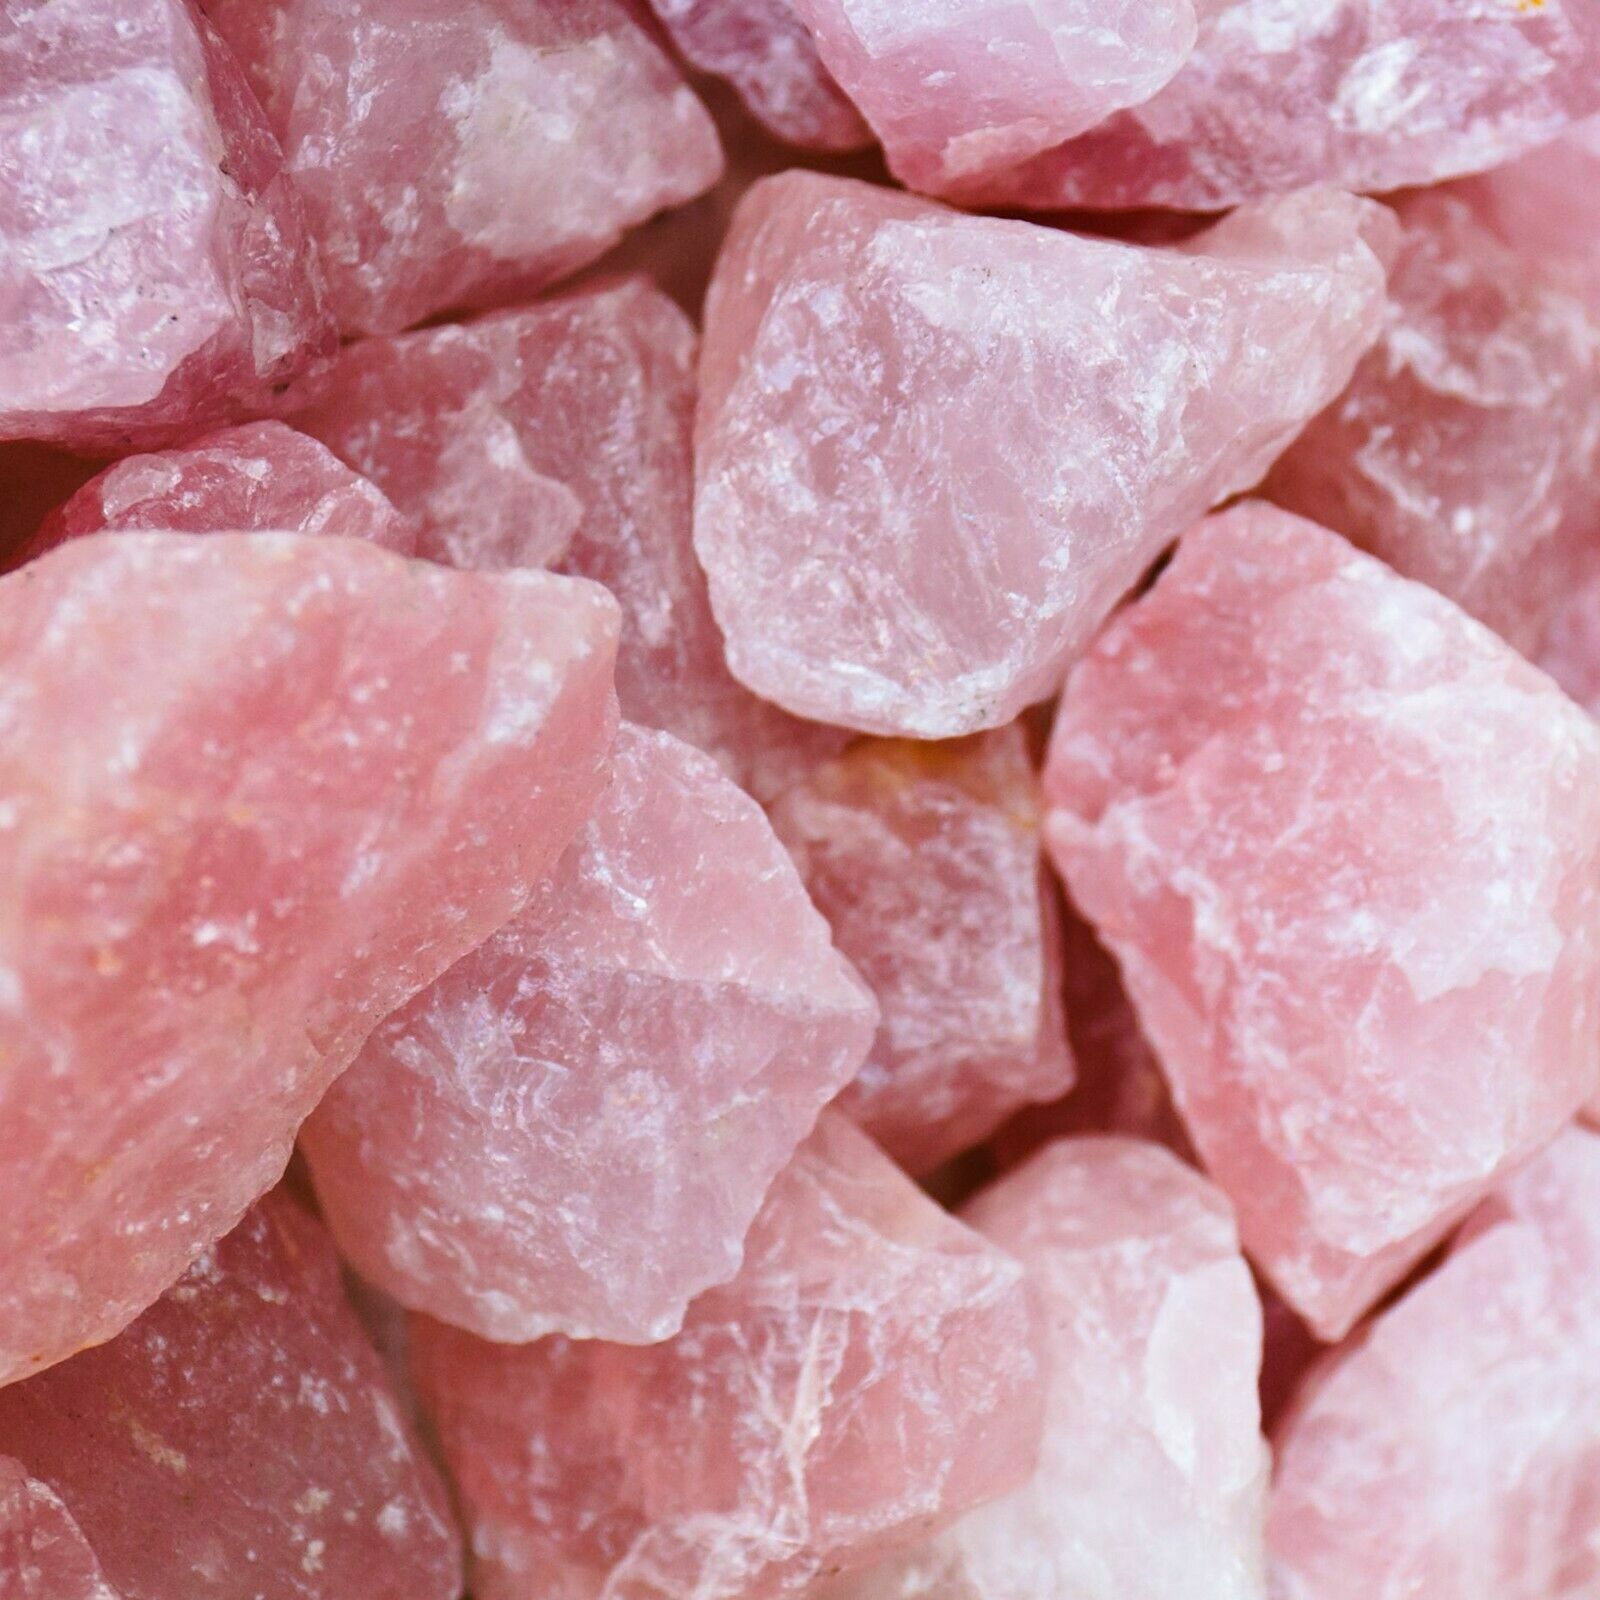 EPIC GEMS- 200 Ct+ 1pc Rose Quartz Crystal Collection Rough Mineral Healing Rock